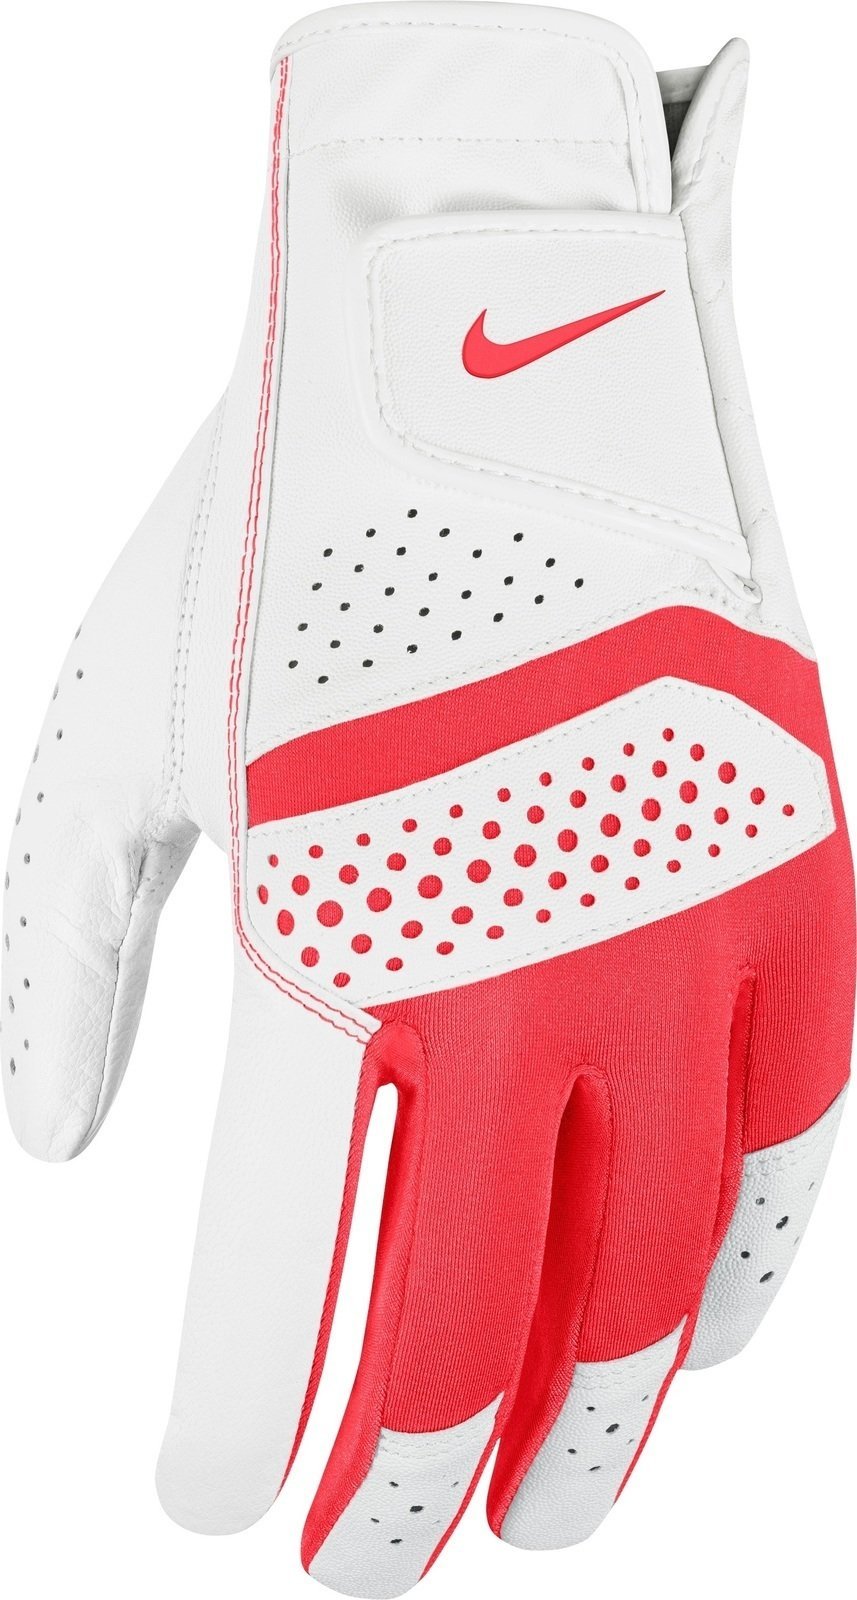 Gloves Nike Tech Xtreme VI Mens Golf Glove White Left Hand for Right Handed Golfers S